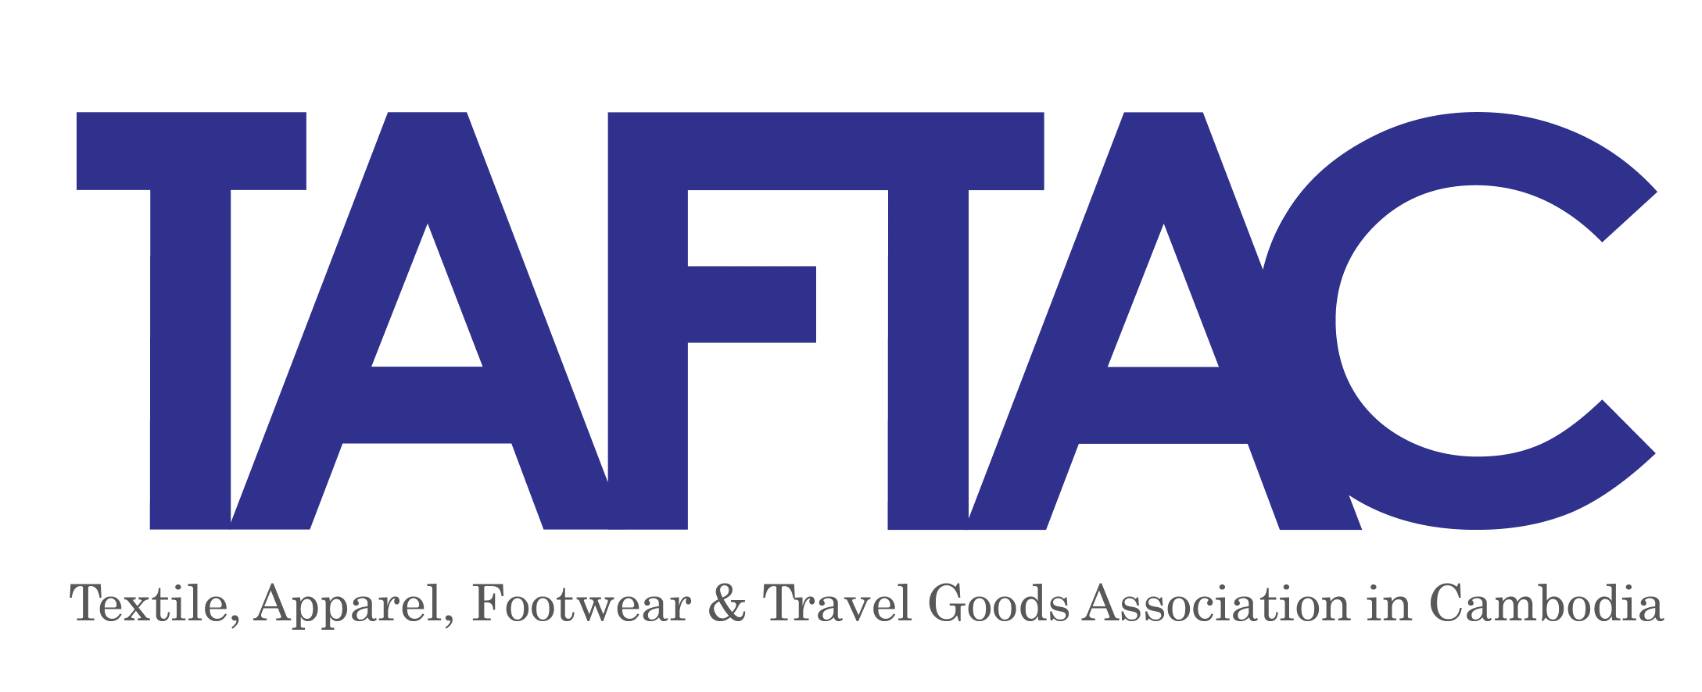 Textile, Apparel, Footwear & Travel Goods Association in Cambodia